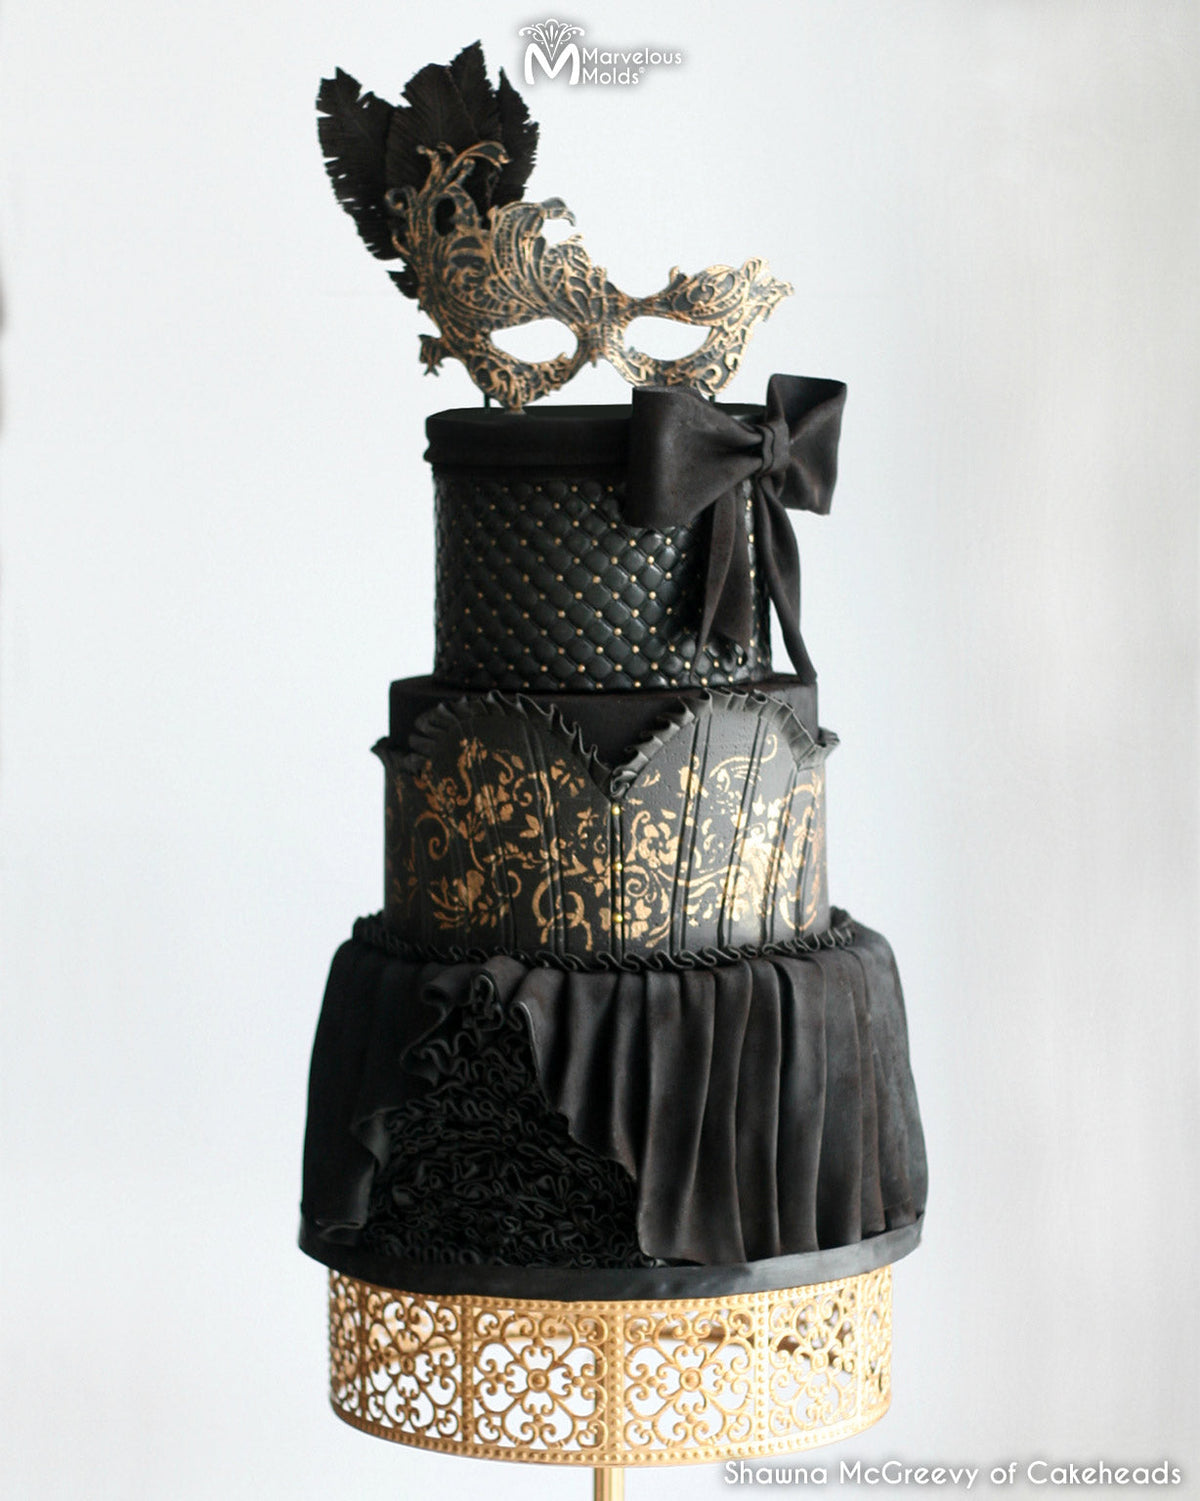 Black Gothic Masquerade Themed Fashion Cake Decorated with Tufted Swiss Dot Simpress Silicone Mold by Marvelous Molds